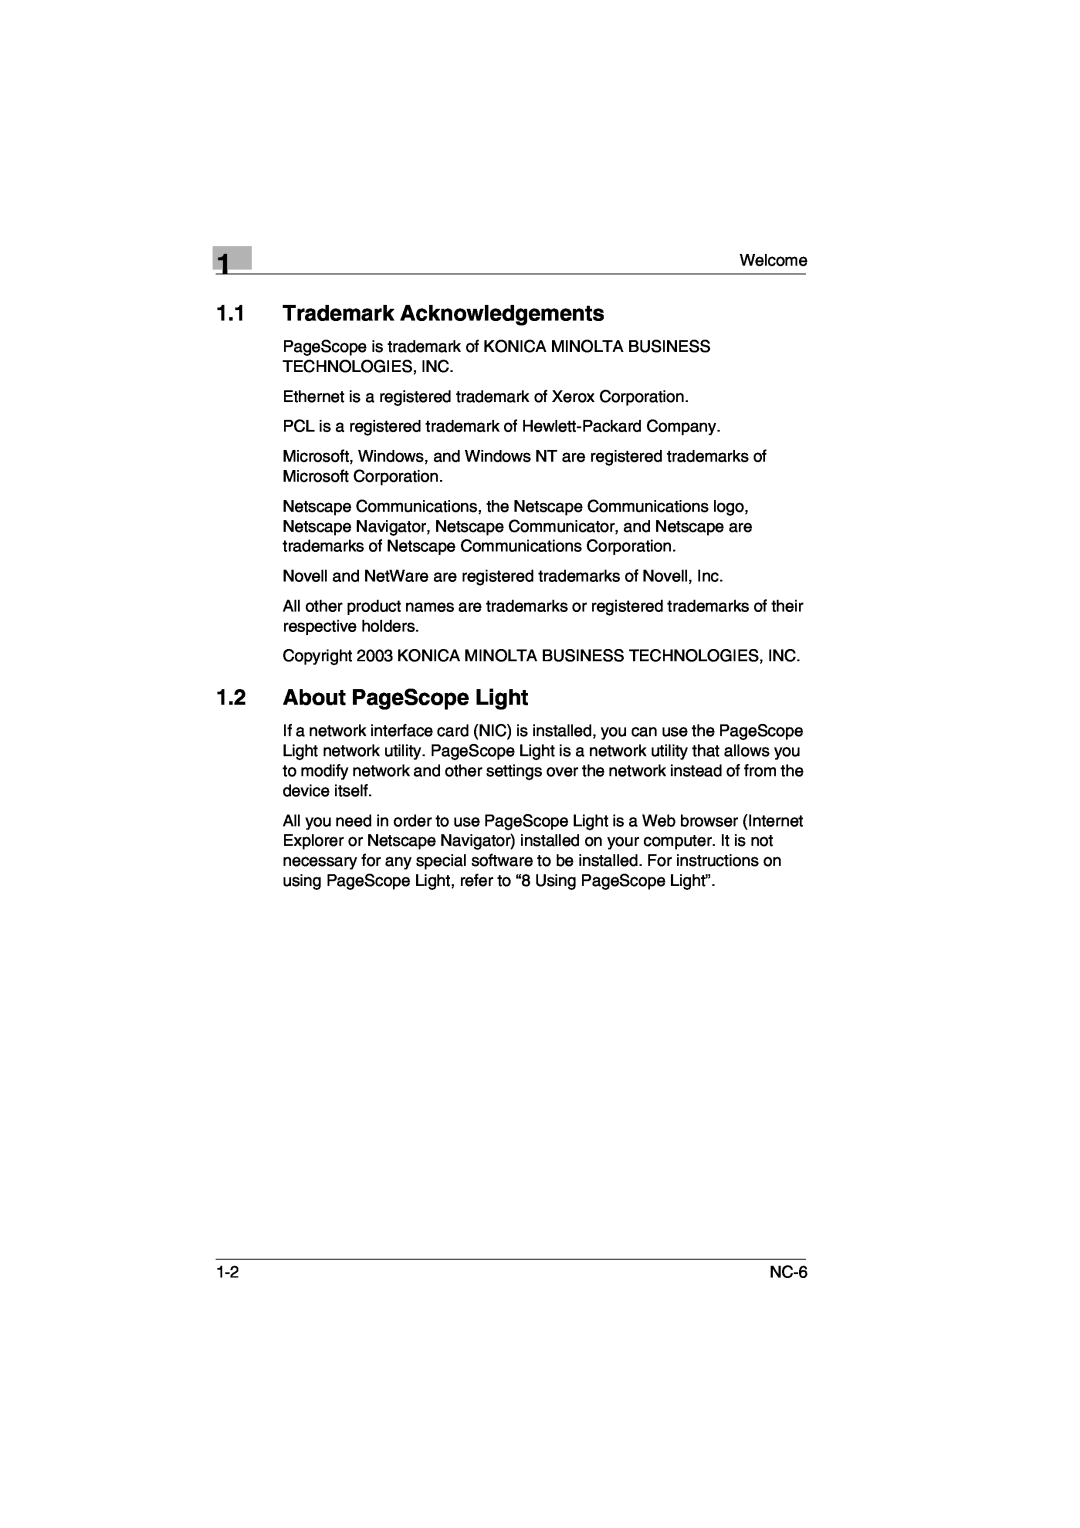 Konica Minolta NC-6 user manual Trademark Acknowledgements, About PageScope Light 